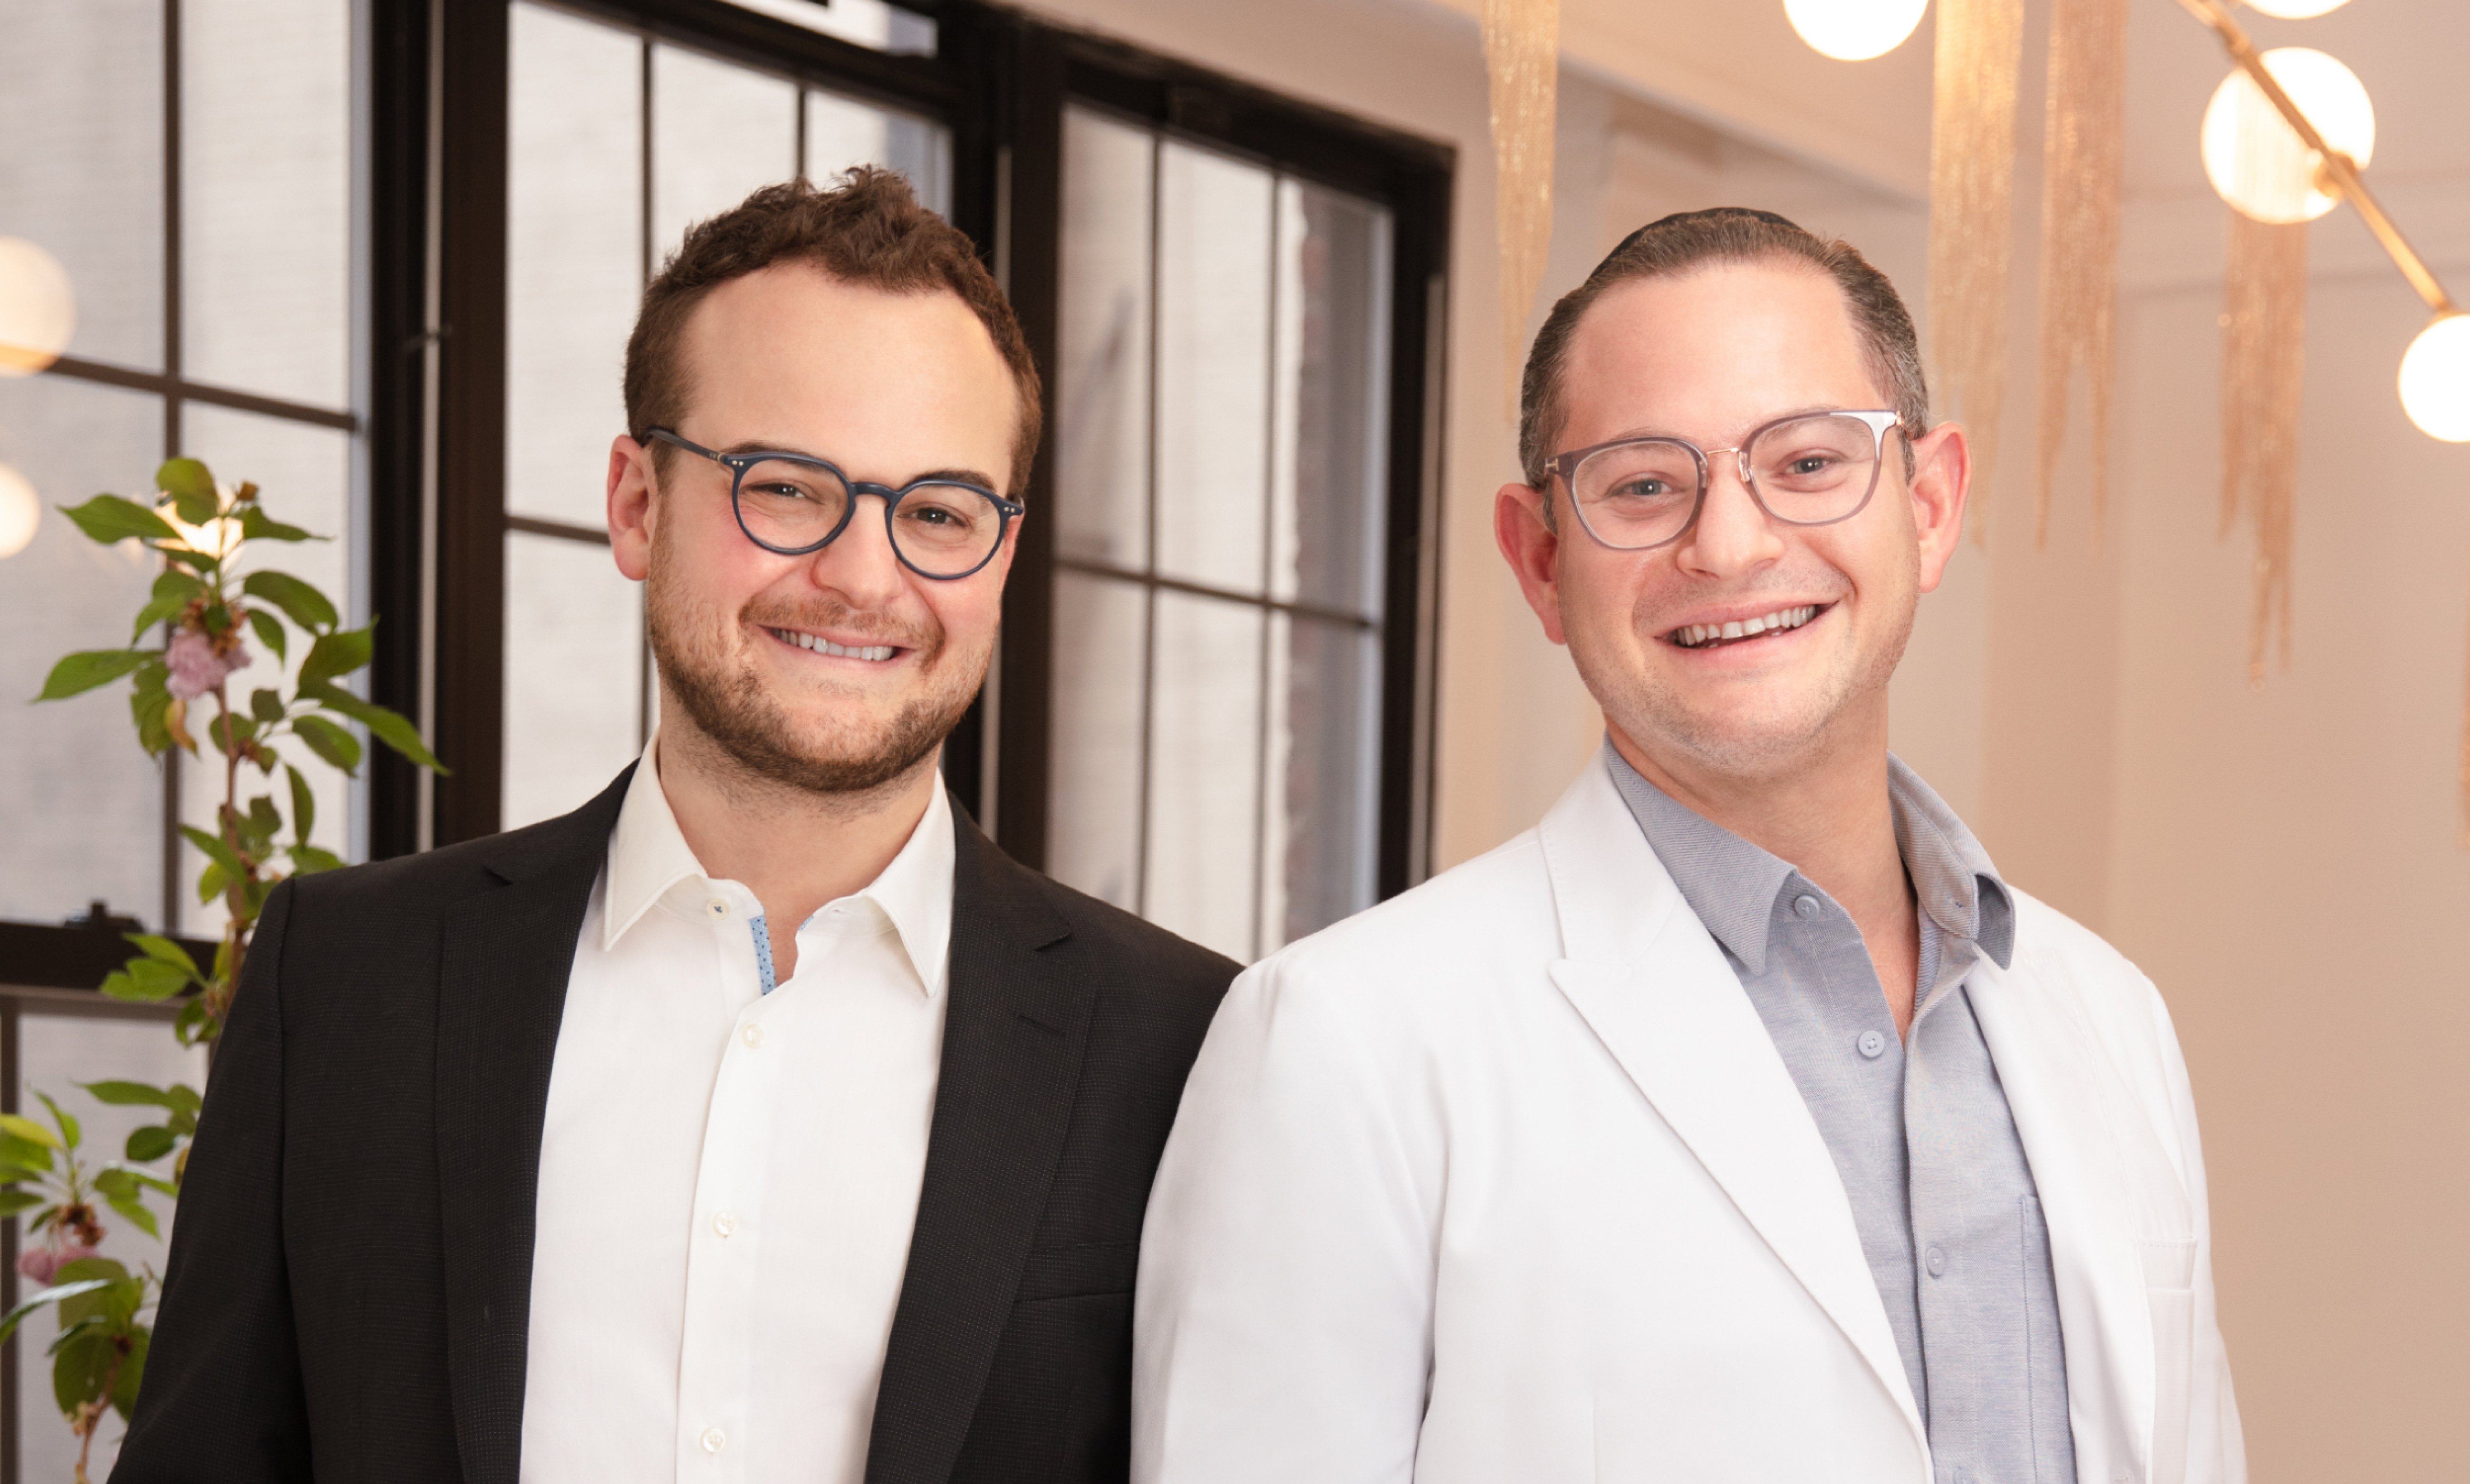 Avi Dorfman co-founder and CEO of Clearing and Dr Jacob Hascalovici co-founder and chief medical officer